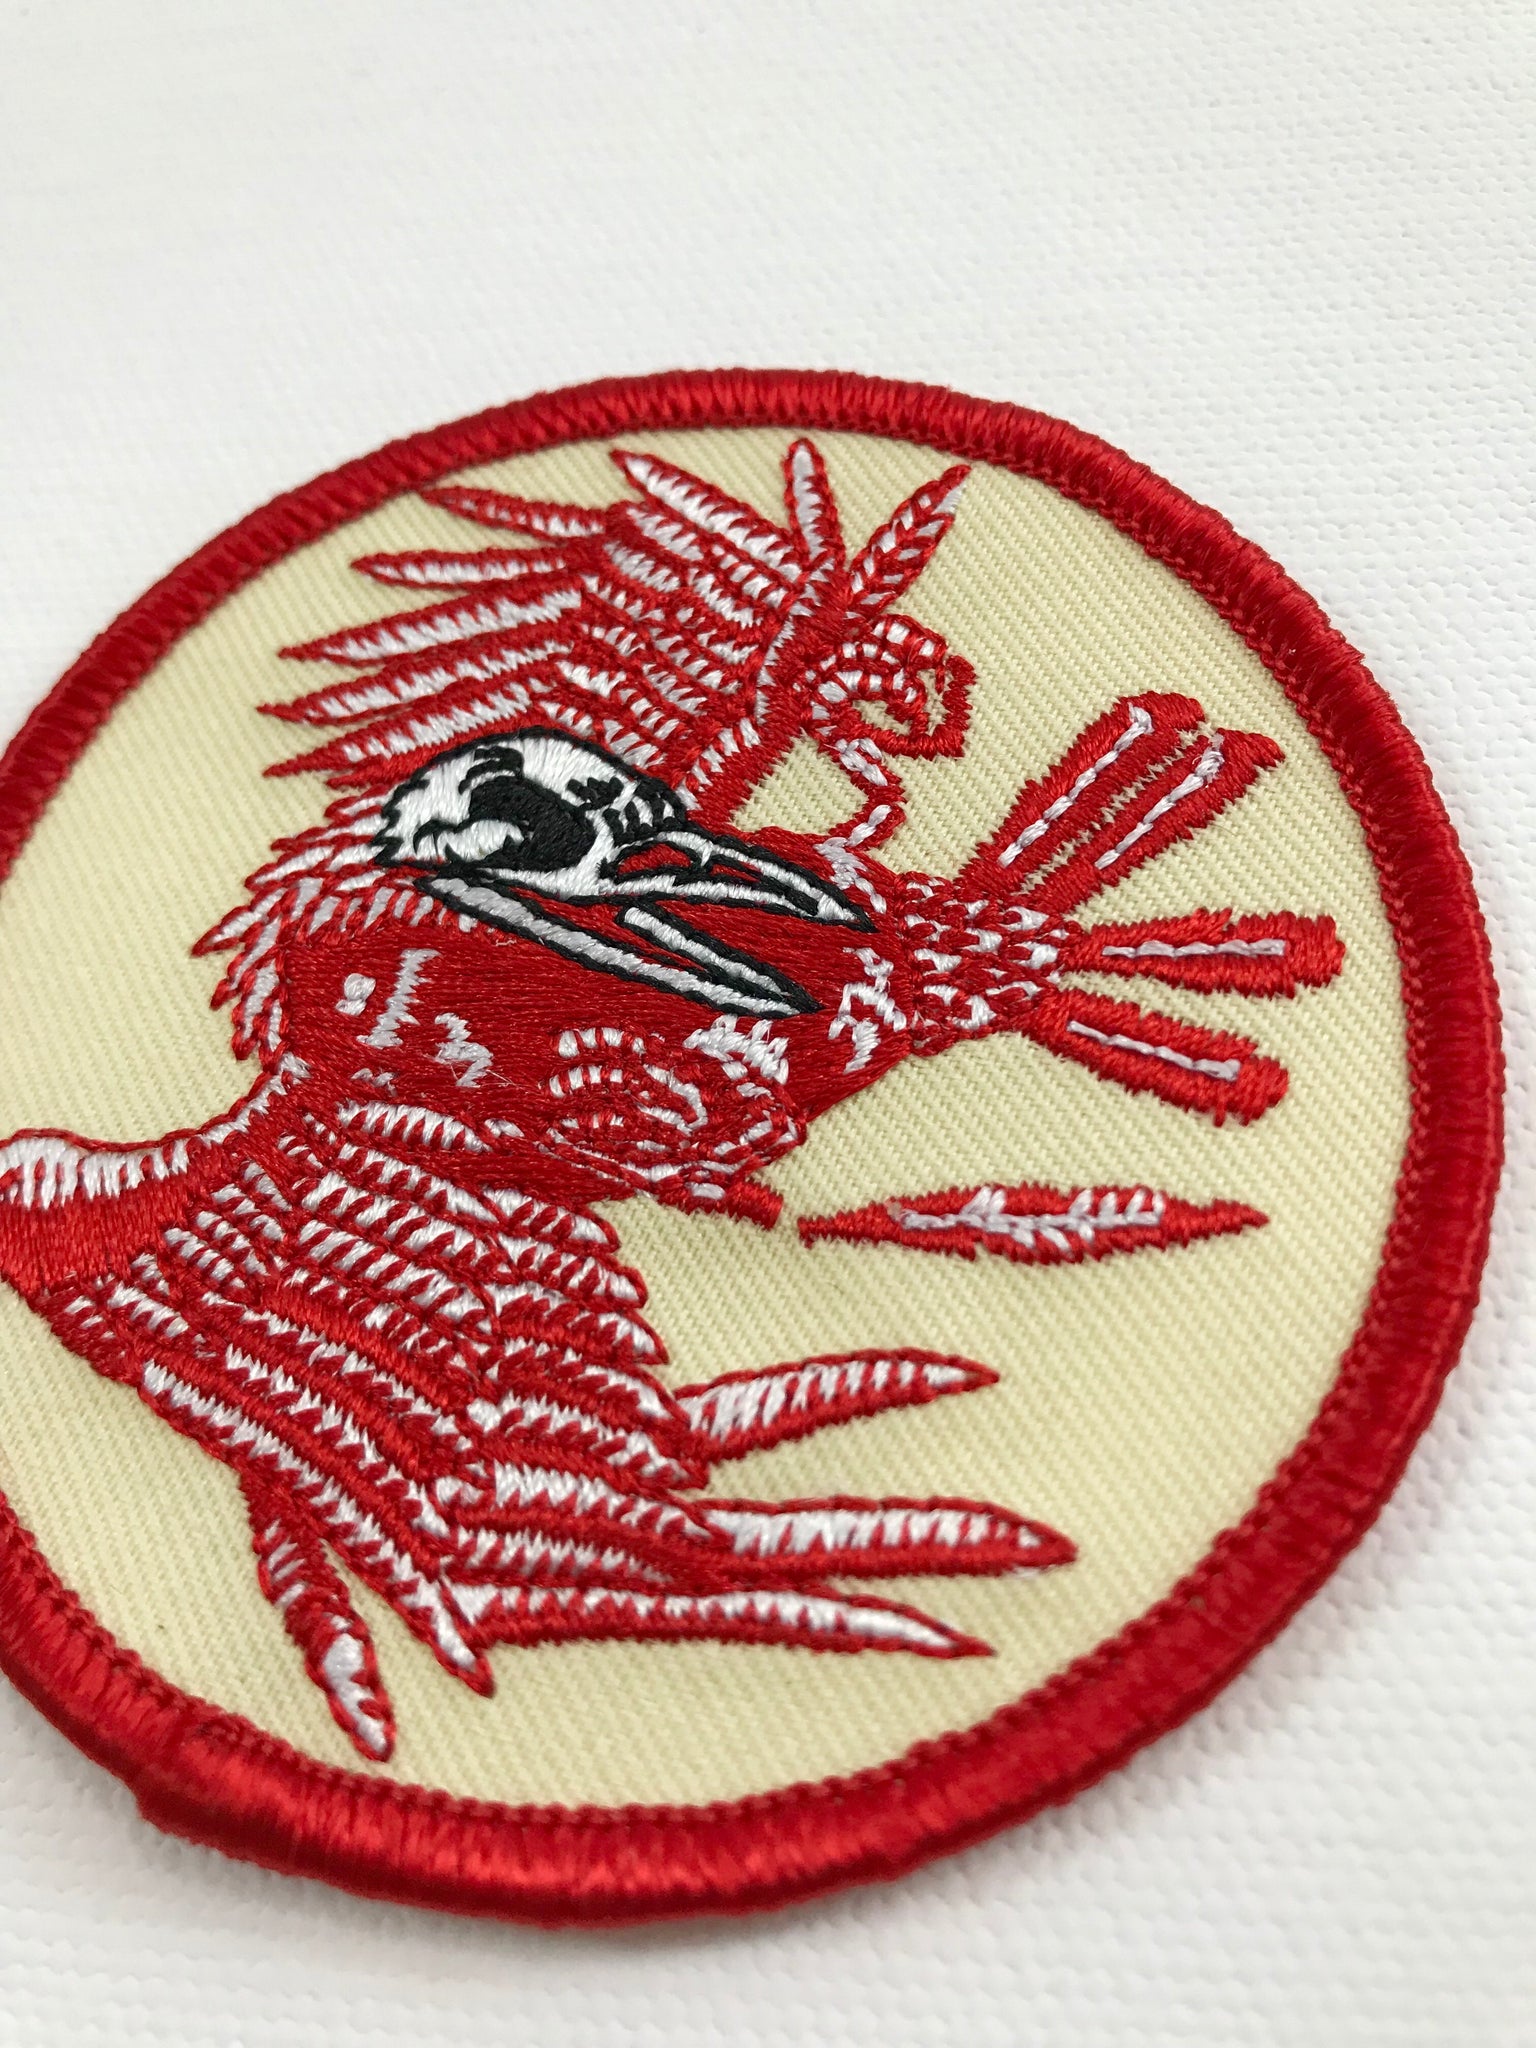 Bird Skeleton 3x3in. Embroidered Patch